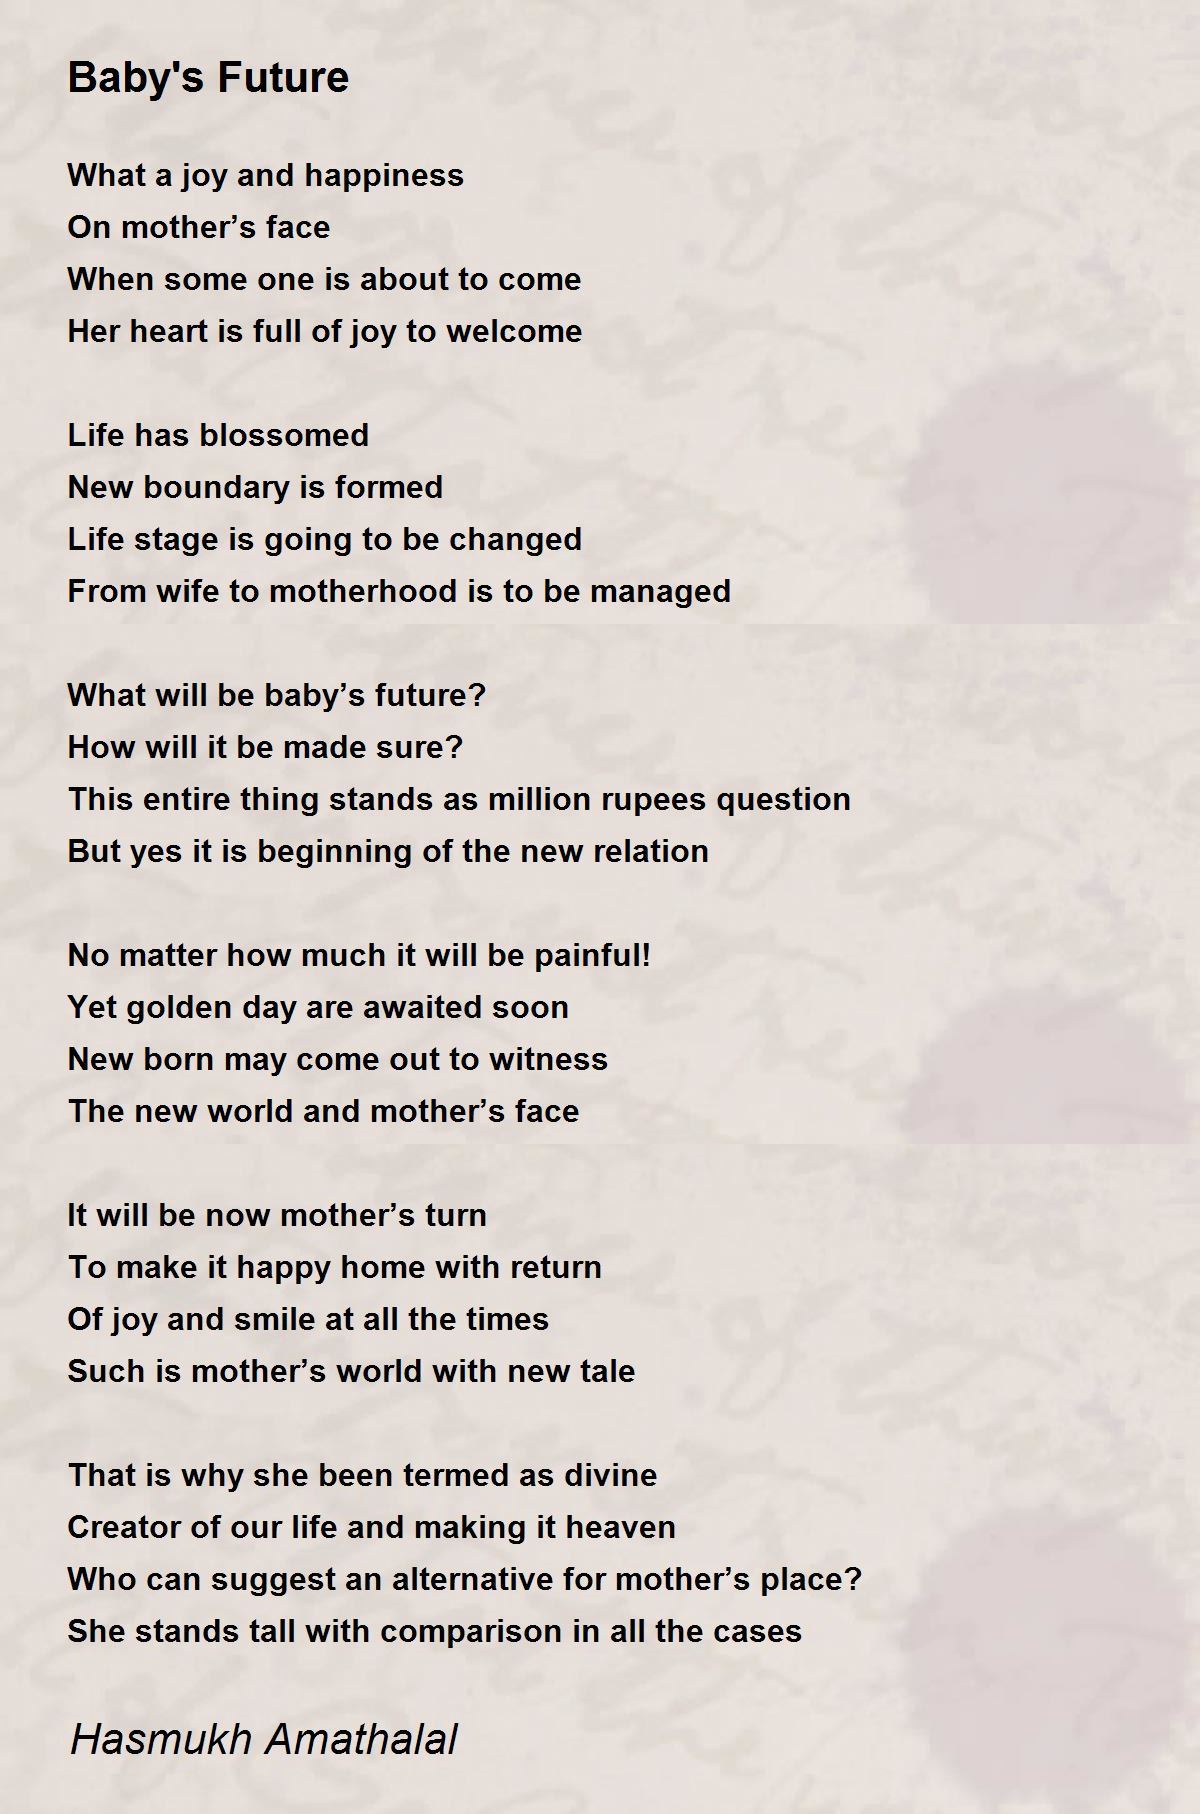 Baby's Future - Baby's Future Poem by Mehta Hasmukh Amathaal